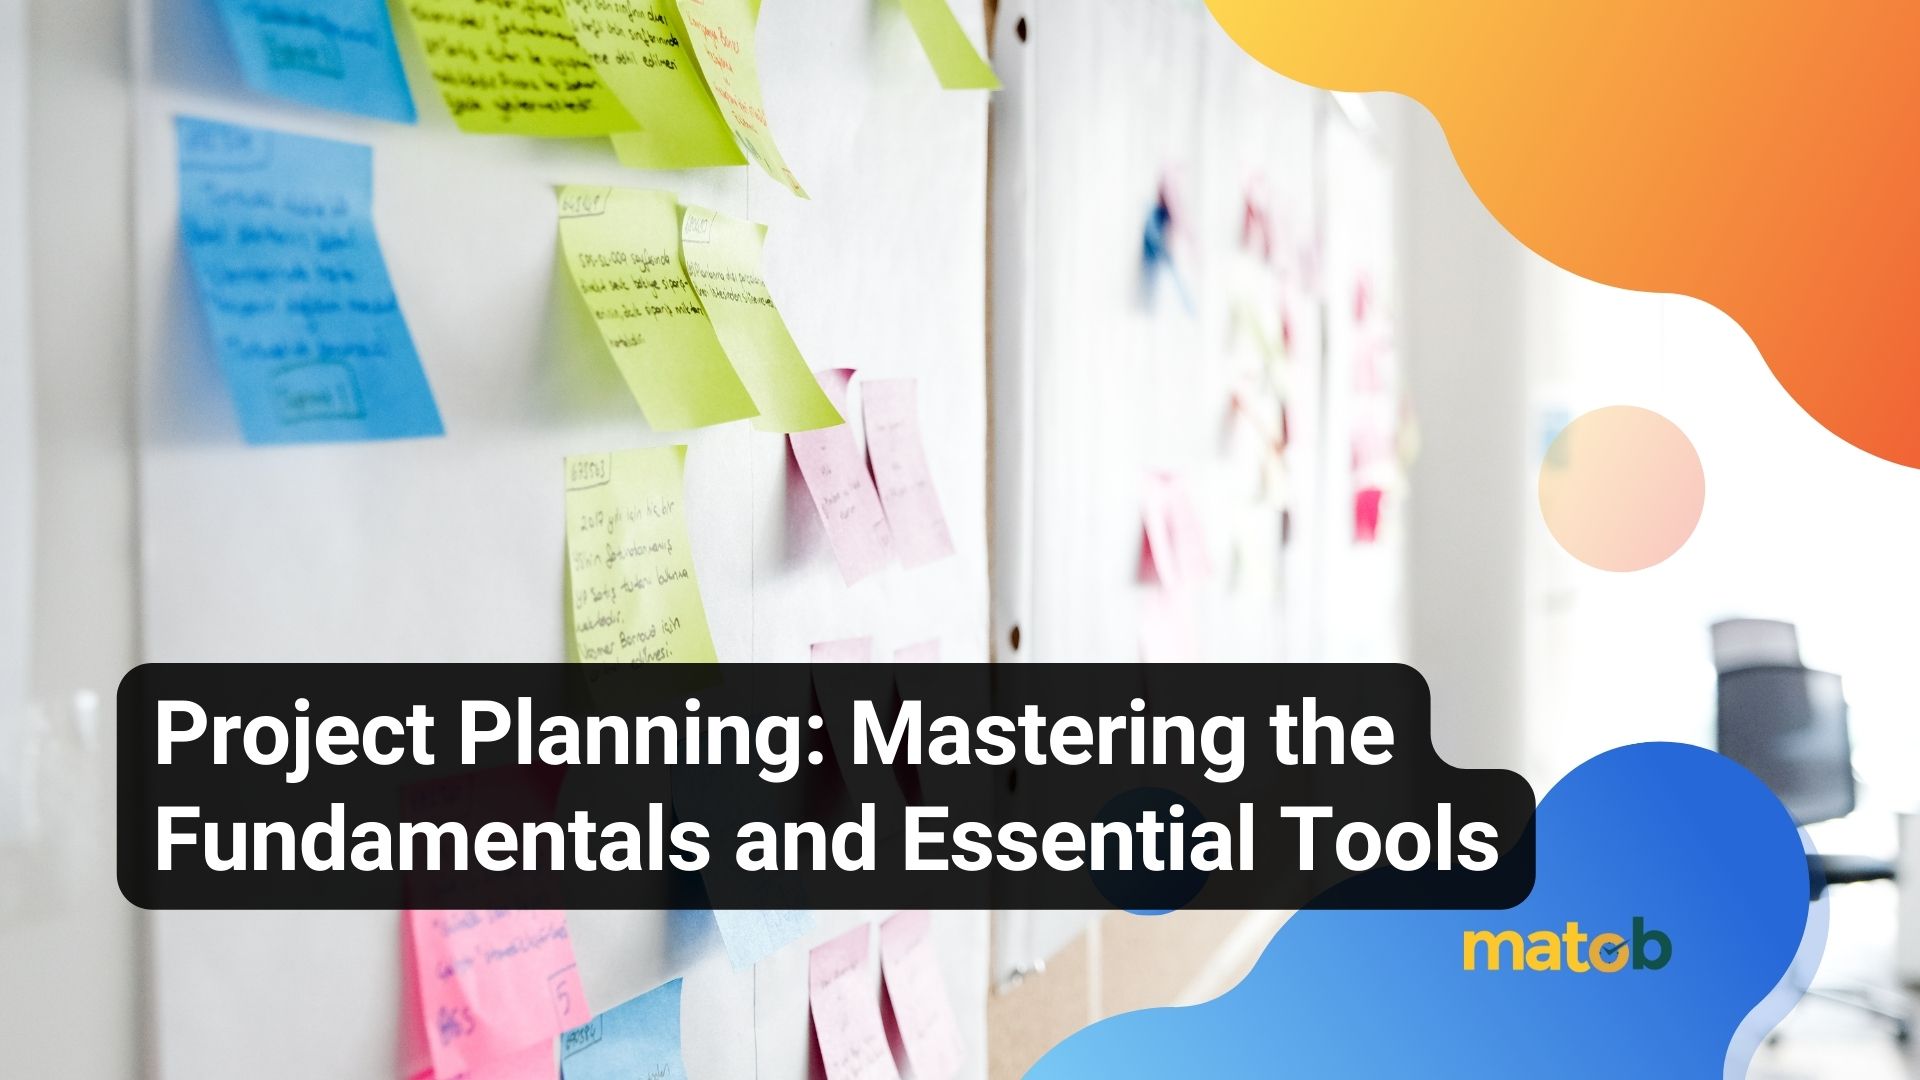 Project Planning: Mastering the Fundamentals and Essential Tools